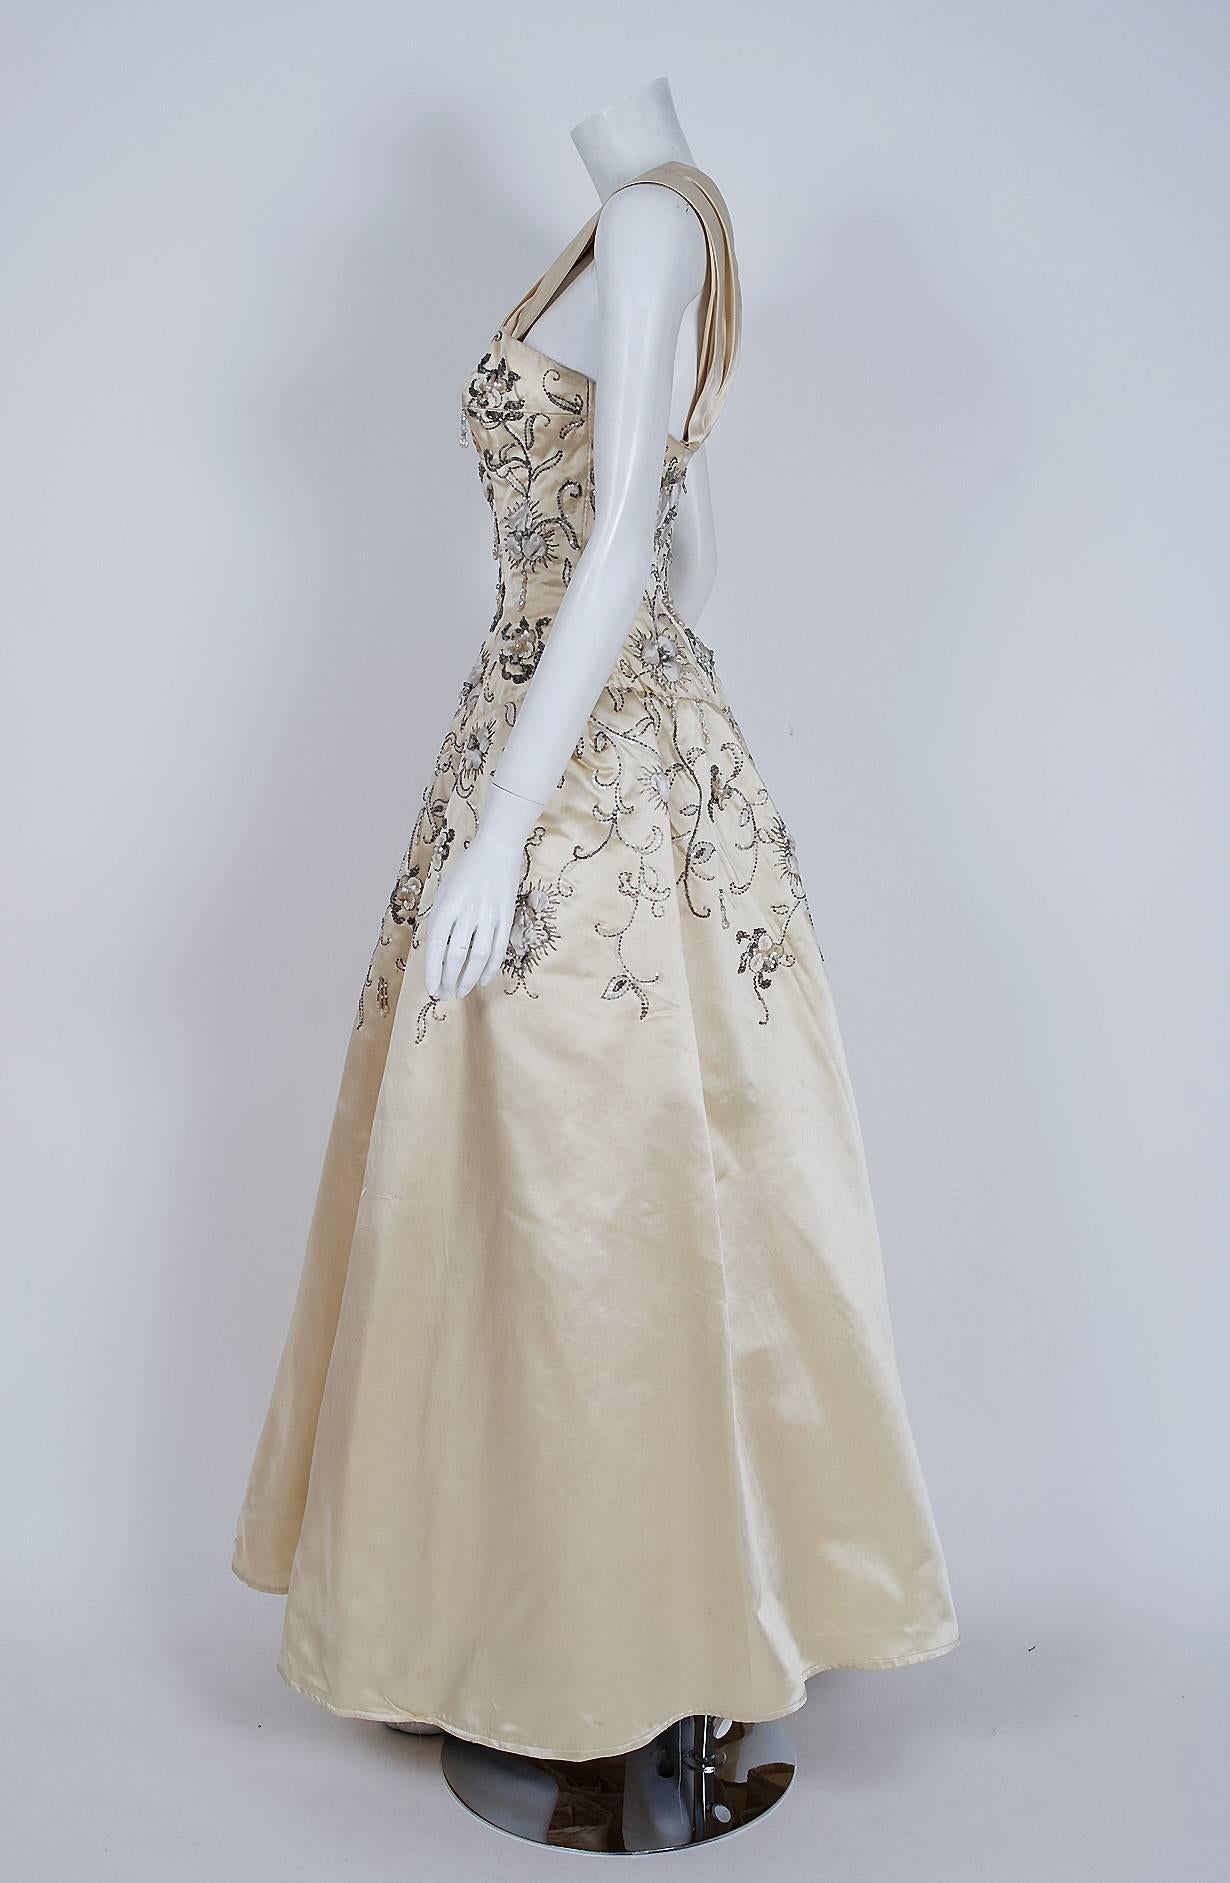 Breathtaking mid-1950's creme silk satin ballgown attributed to Pierre Balmain. This iconic designer created a very sculptural quality which was always allied with a ladylike essence. His garments have a body and a shape of their own. This